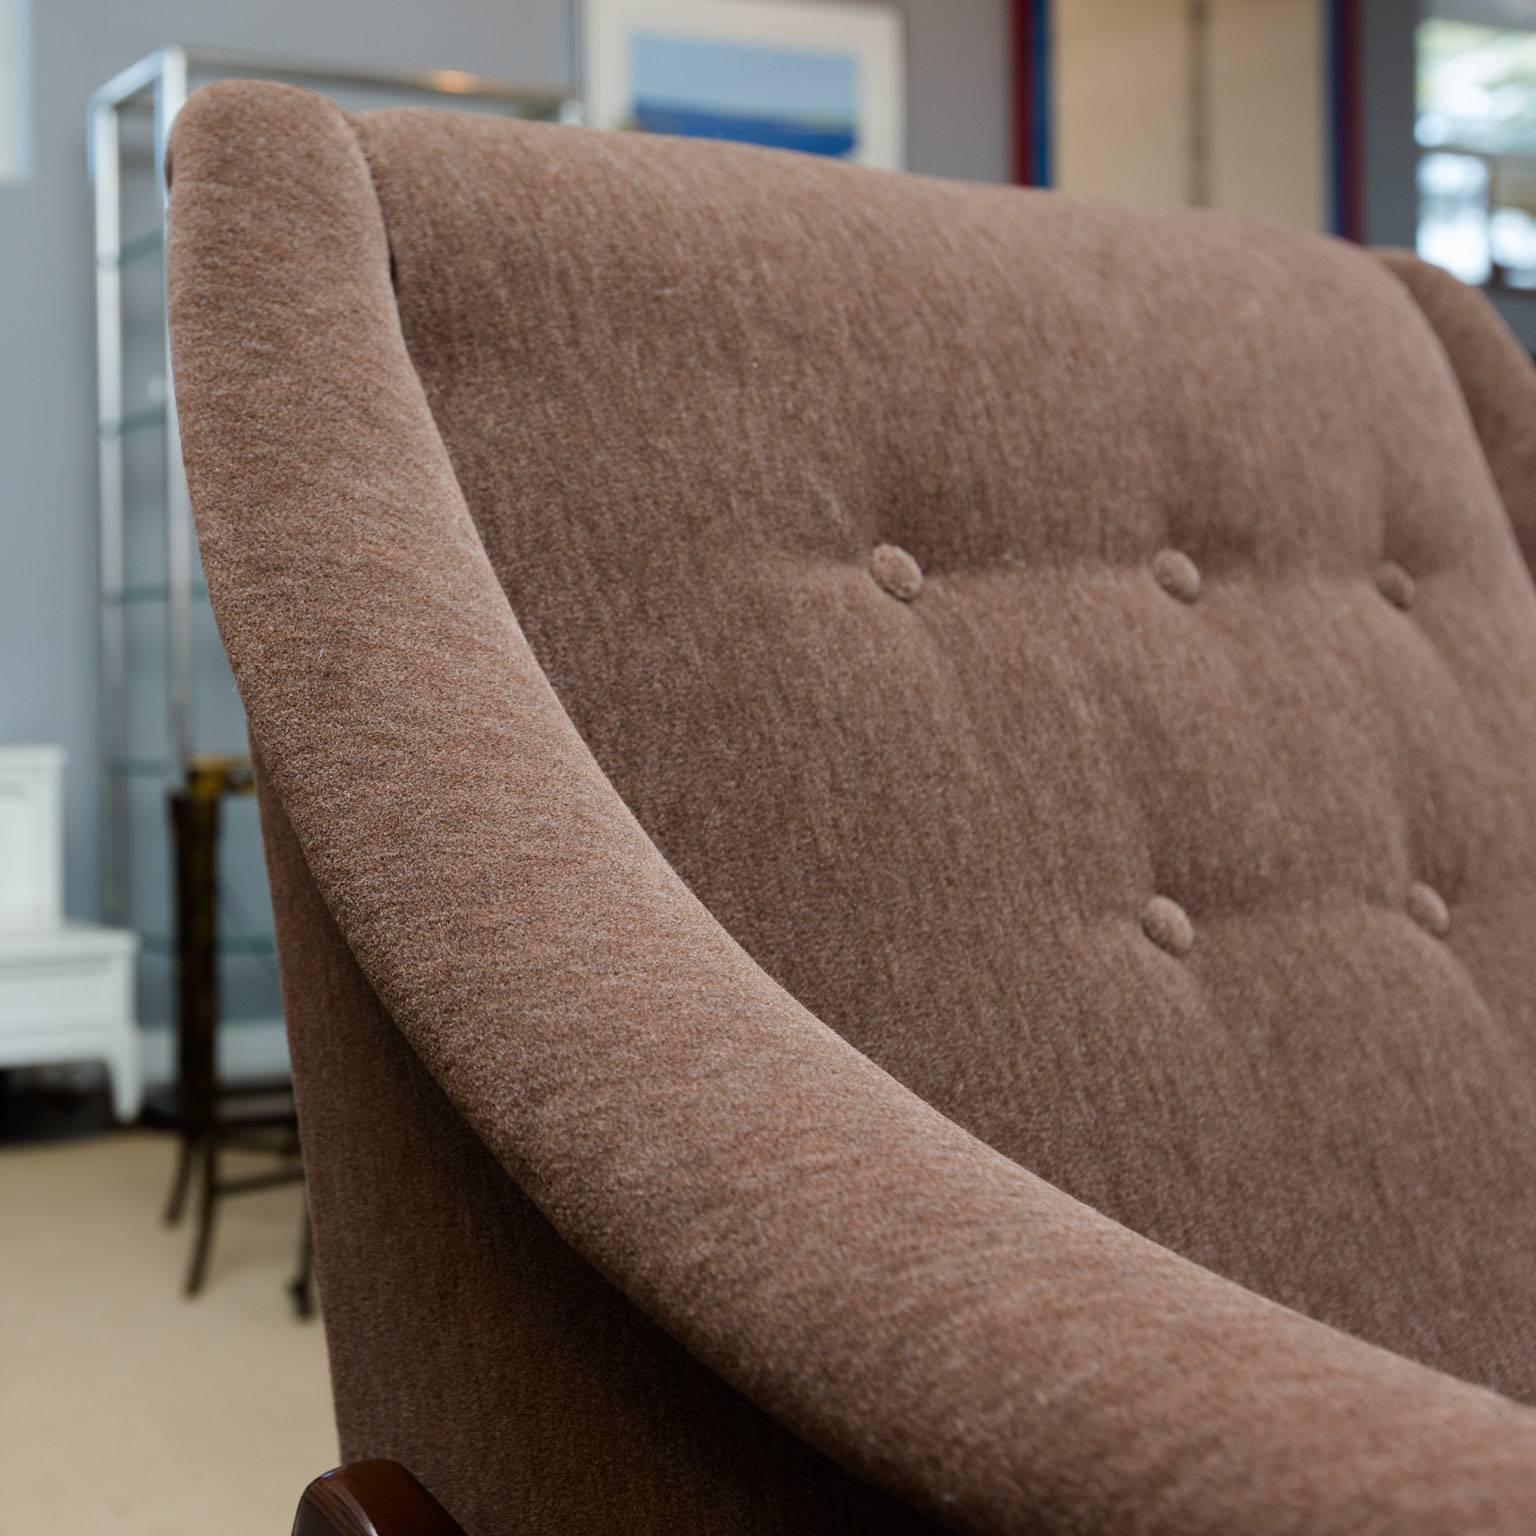 Newly recovered in a brown mohair-like fabric, this rocker or lounge is perfect for new moms and dads to rock the middle of the night away. Perfect for guests of any age. Frame and fabric in mint condition.